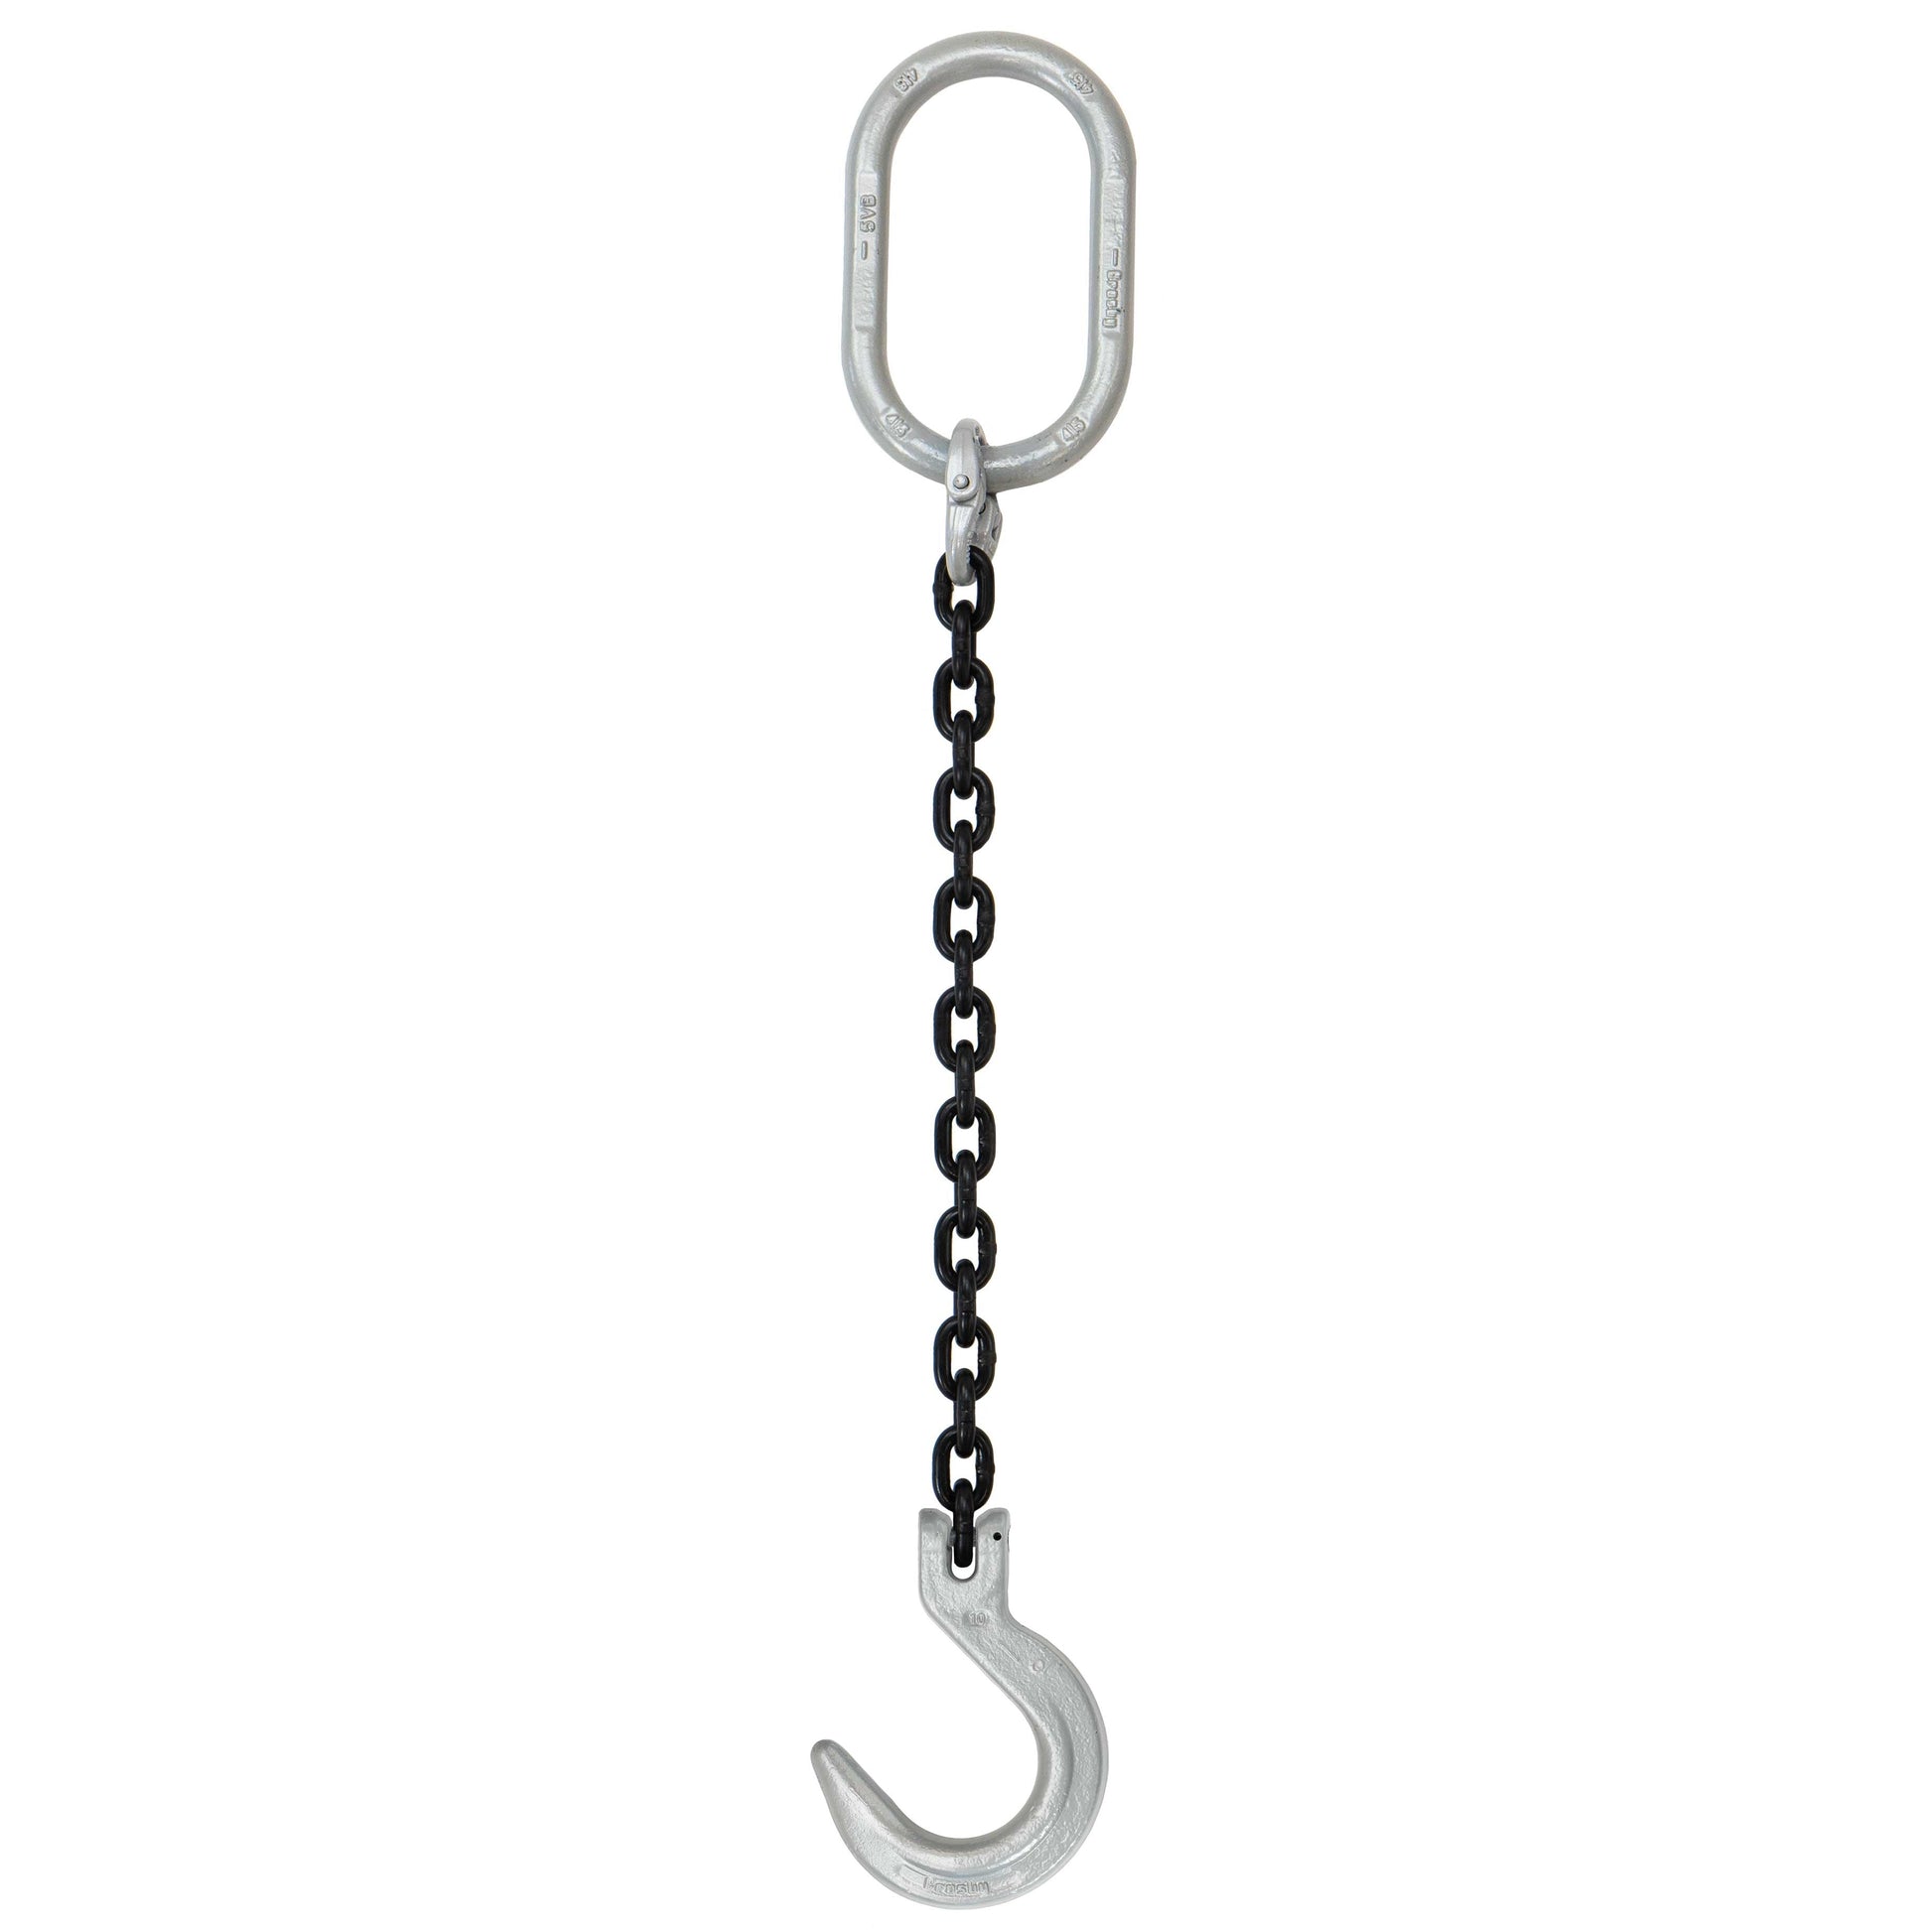 12 inch x 5 foot Domestic Single Leg Chain Sling w Crosby Foundry Hook Grade 100 image 1 of 2